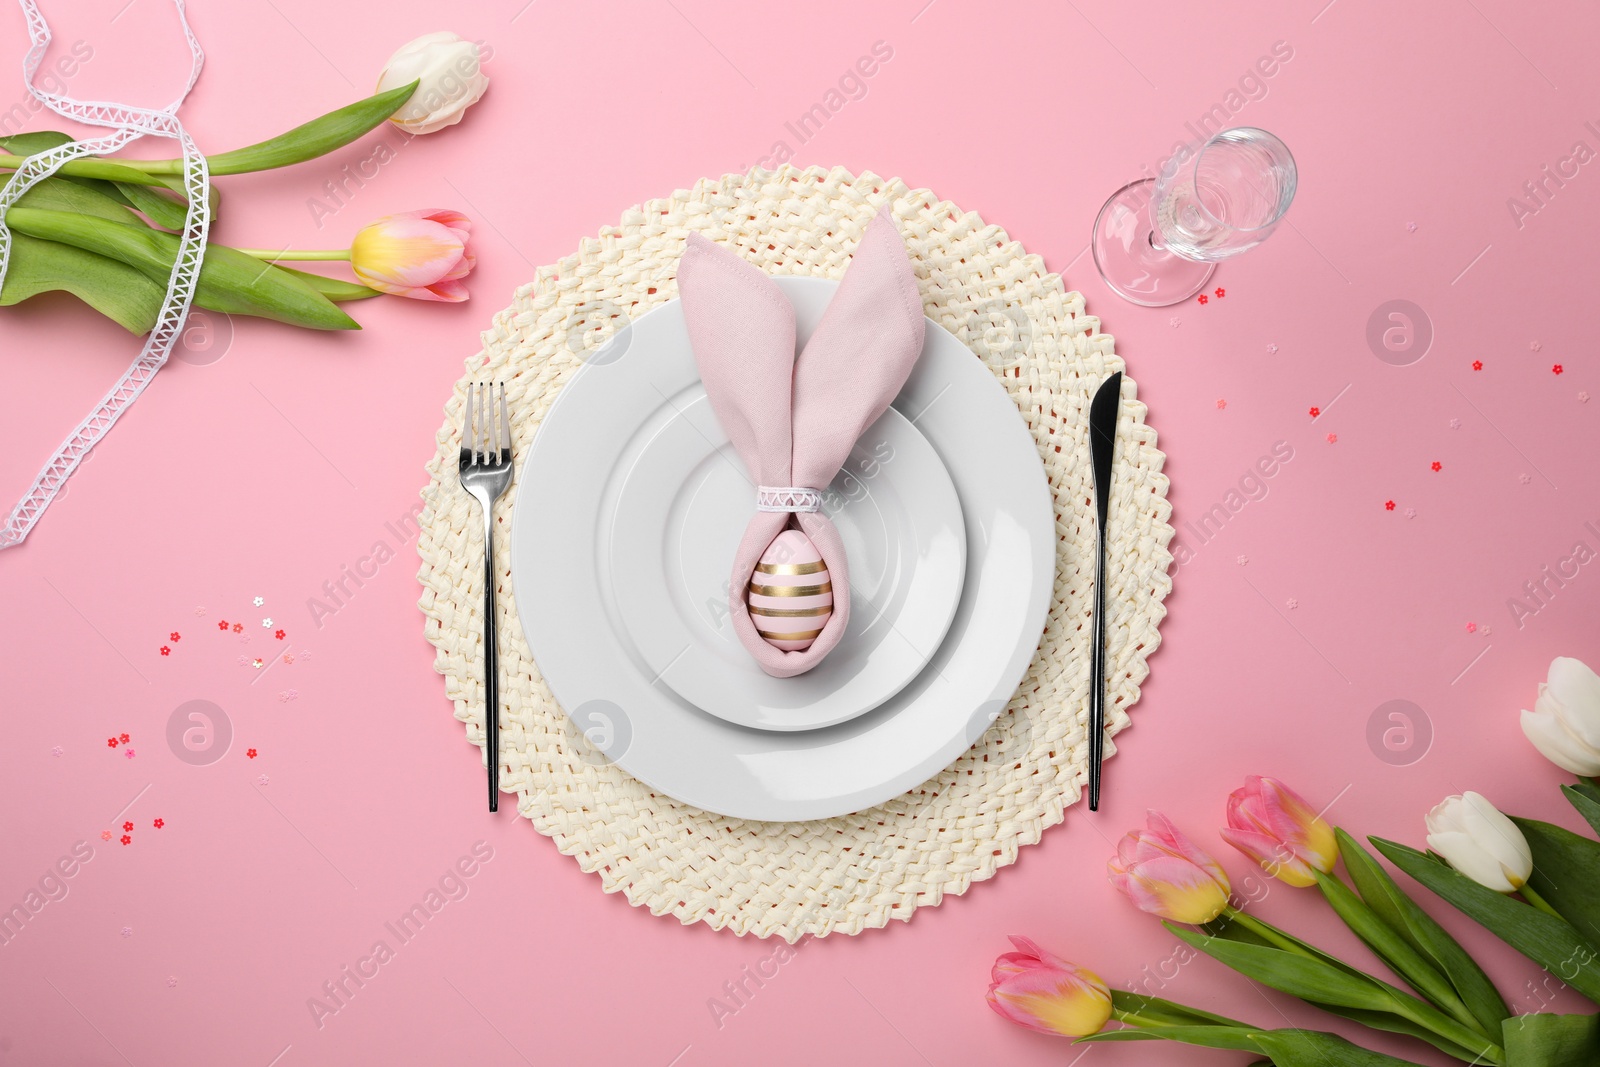 Photo of Festive table setting with painted egg, plates and tulips on pink background, flat lay. Easter celebration